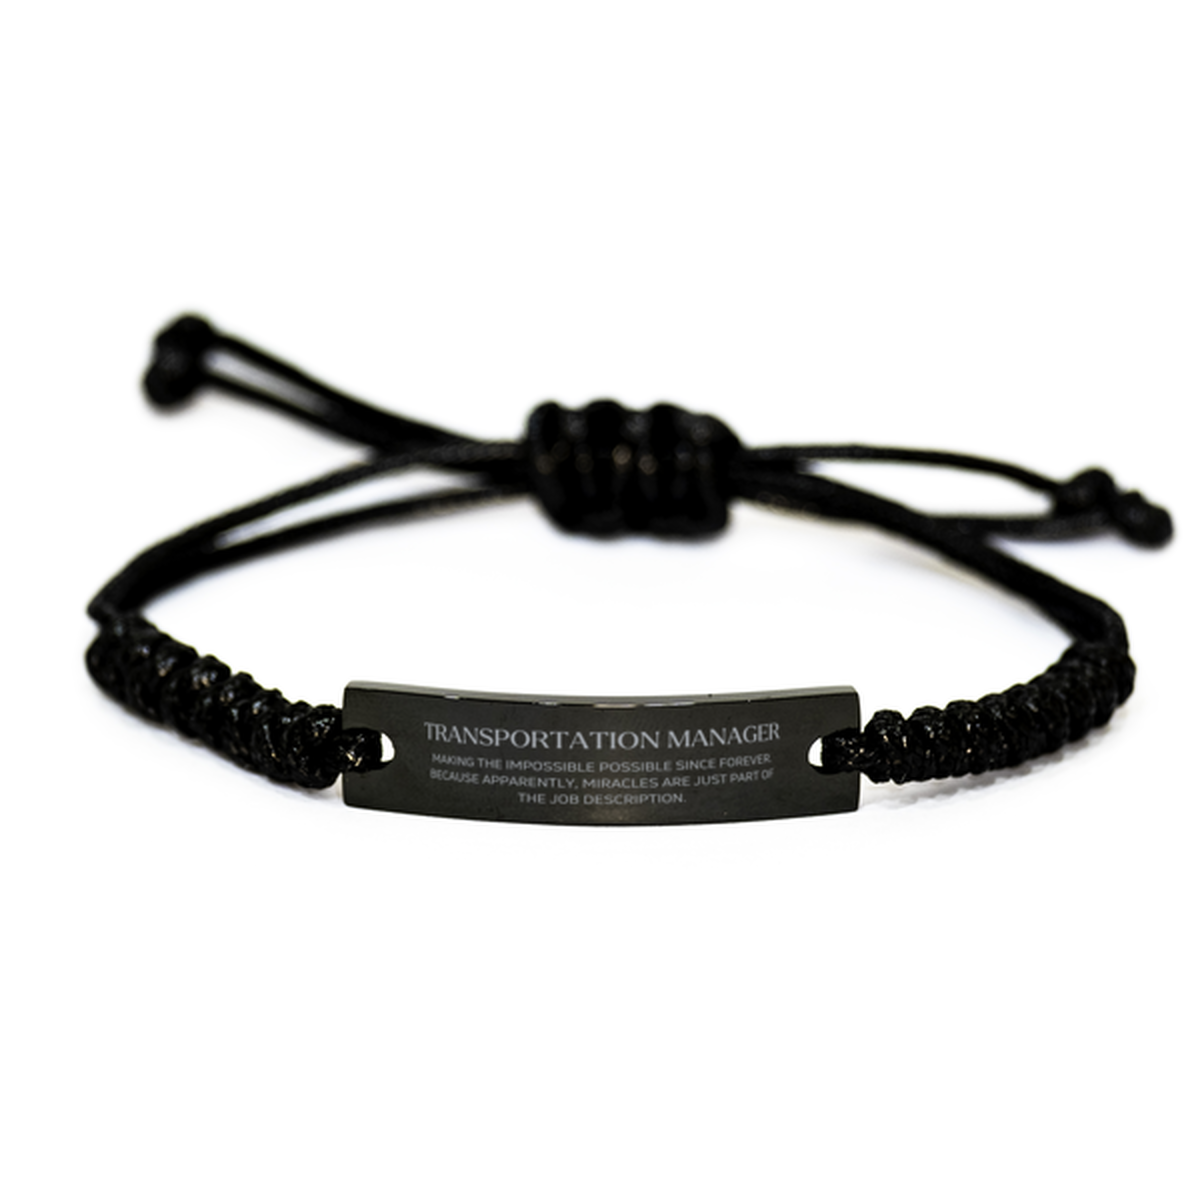 Funny Transportation Manager Gifts, Miracles are just part of the job description, Inspirational Birthday Black Rope Bracelet For Transportation Manager, Men, Women, Coworkers, Friends, Boss